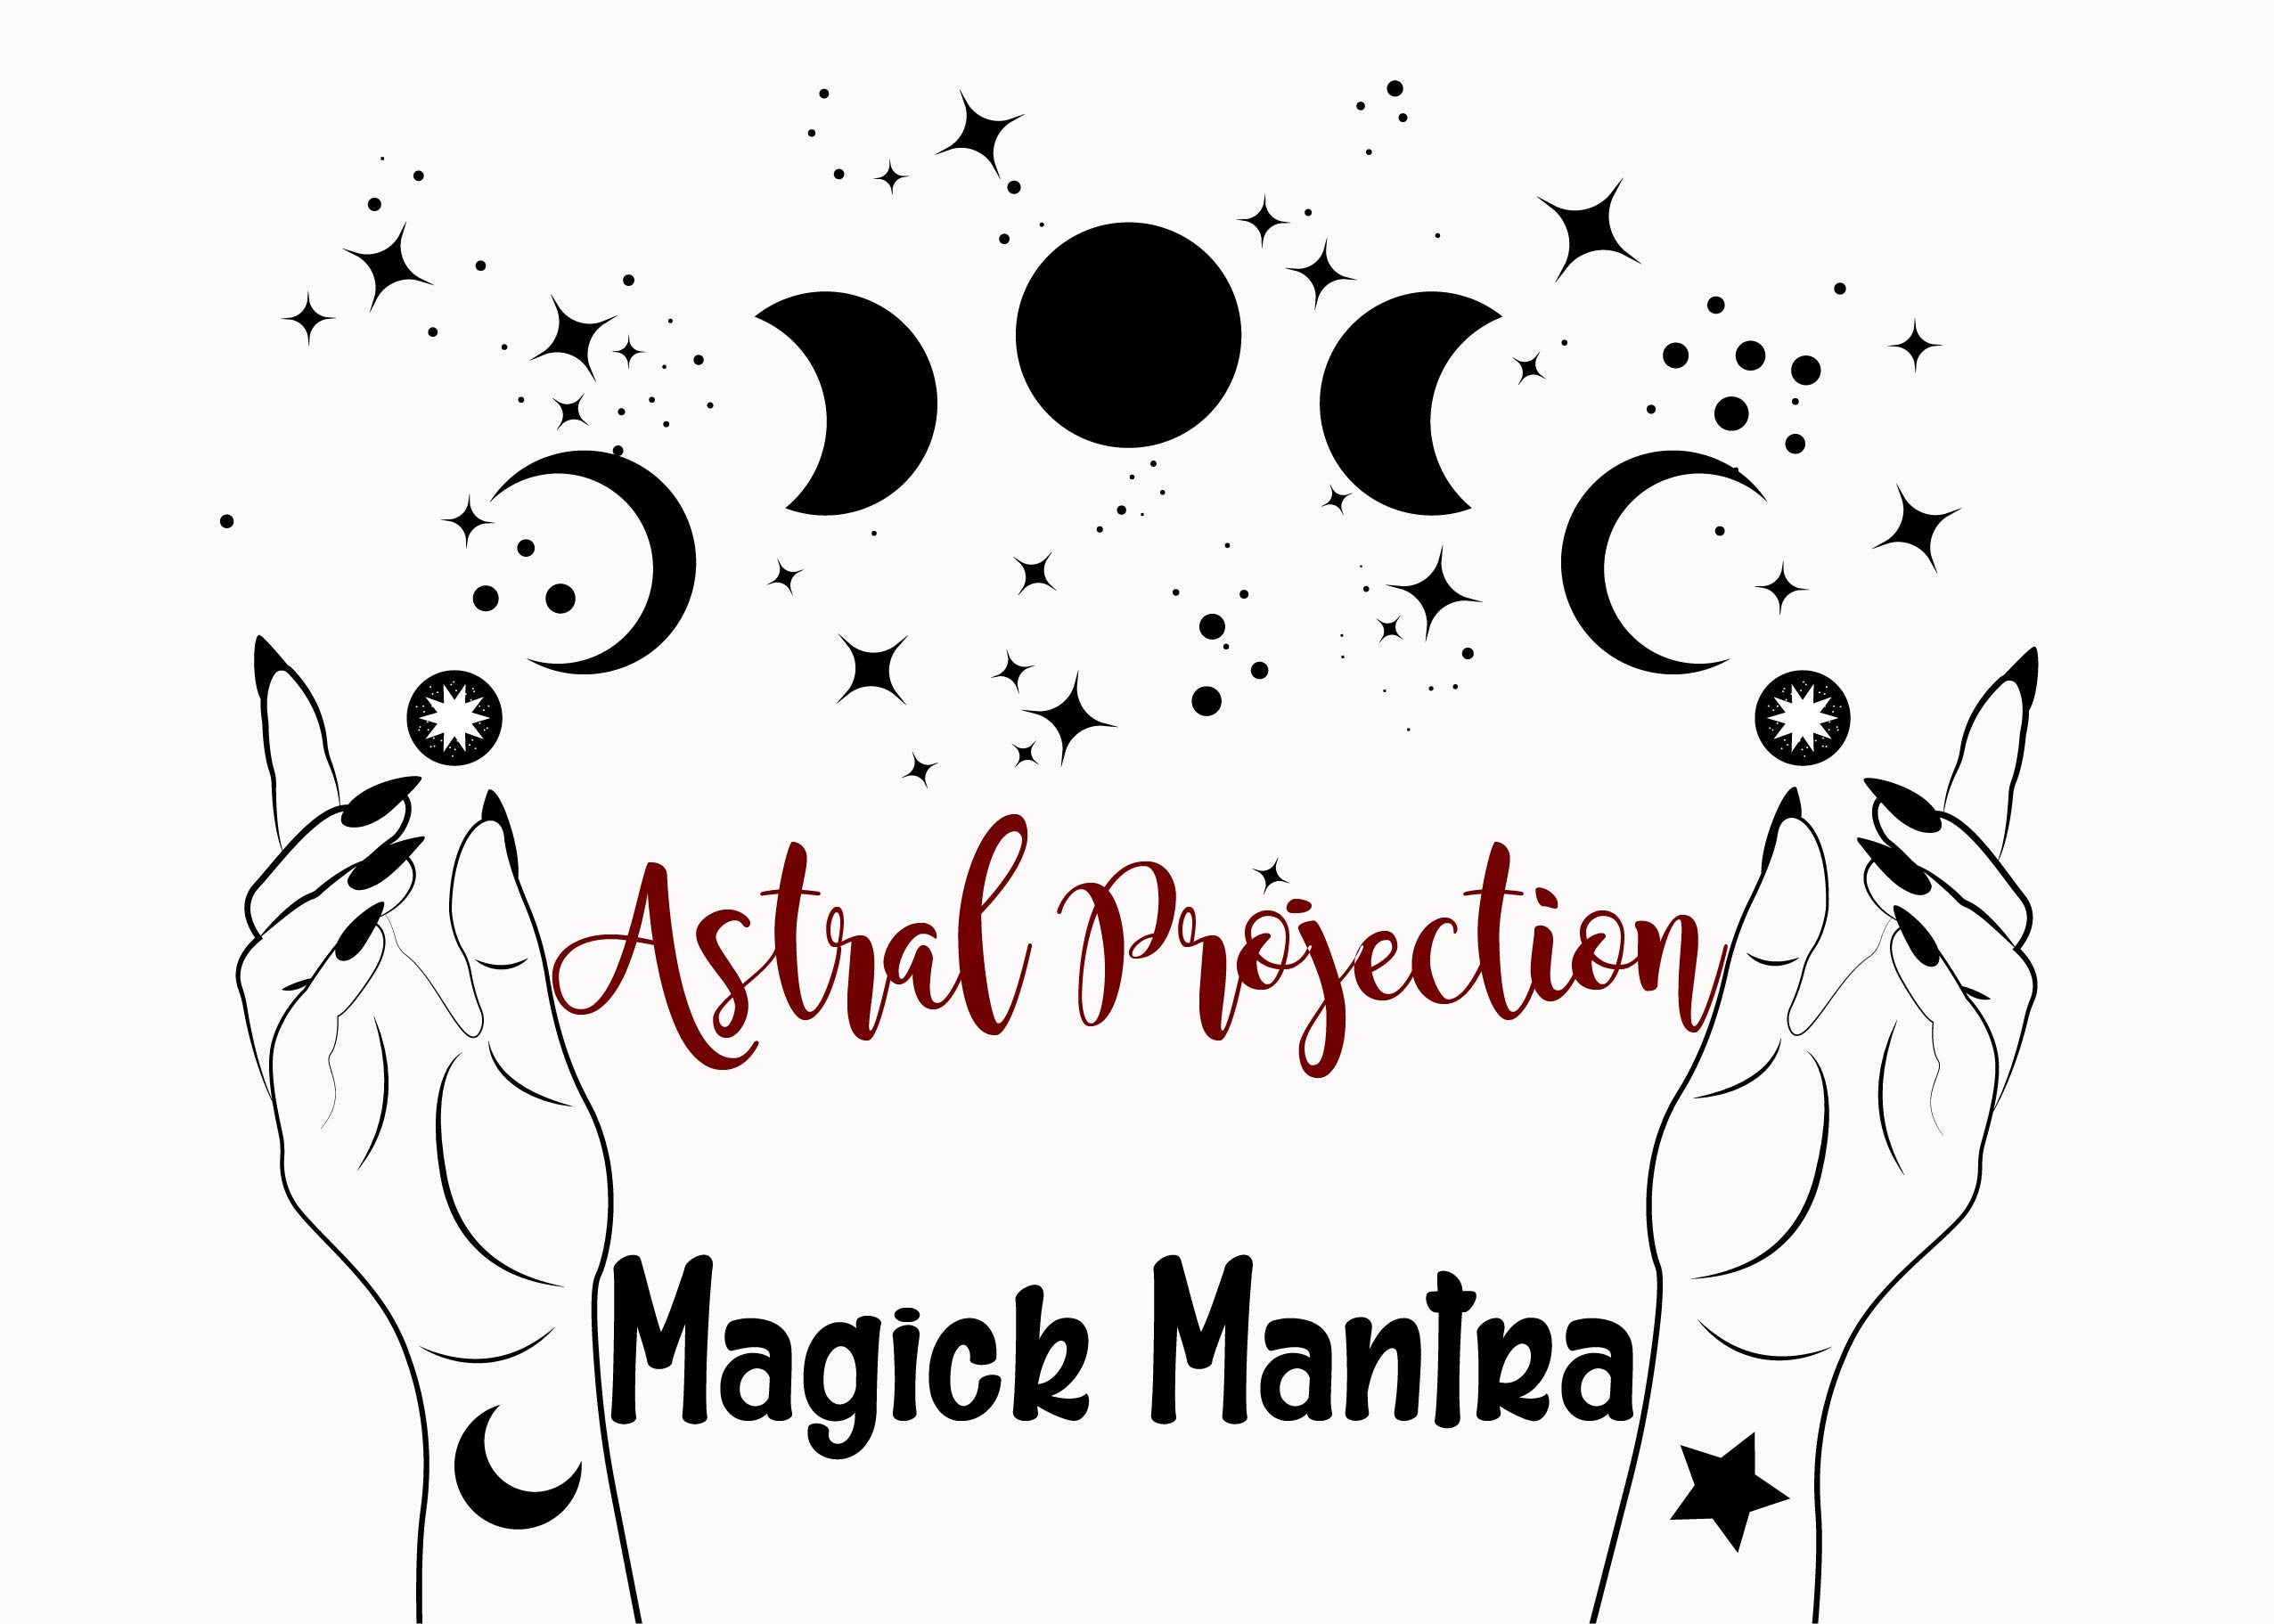 Magick Mantra for Astral Projection